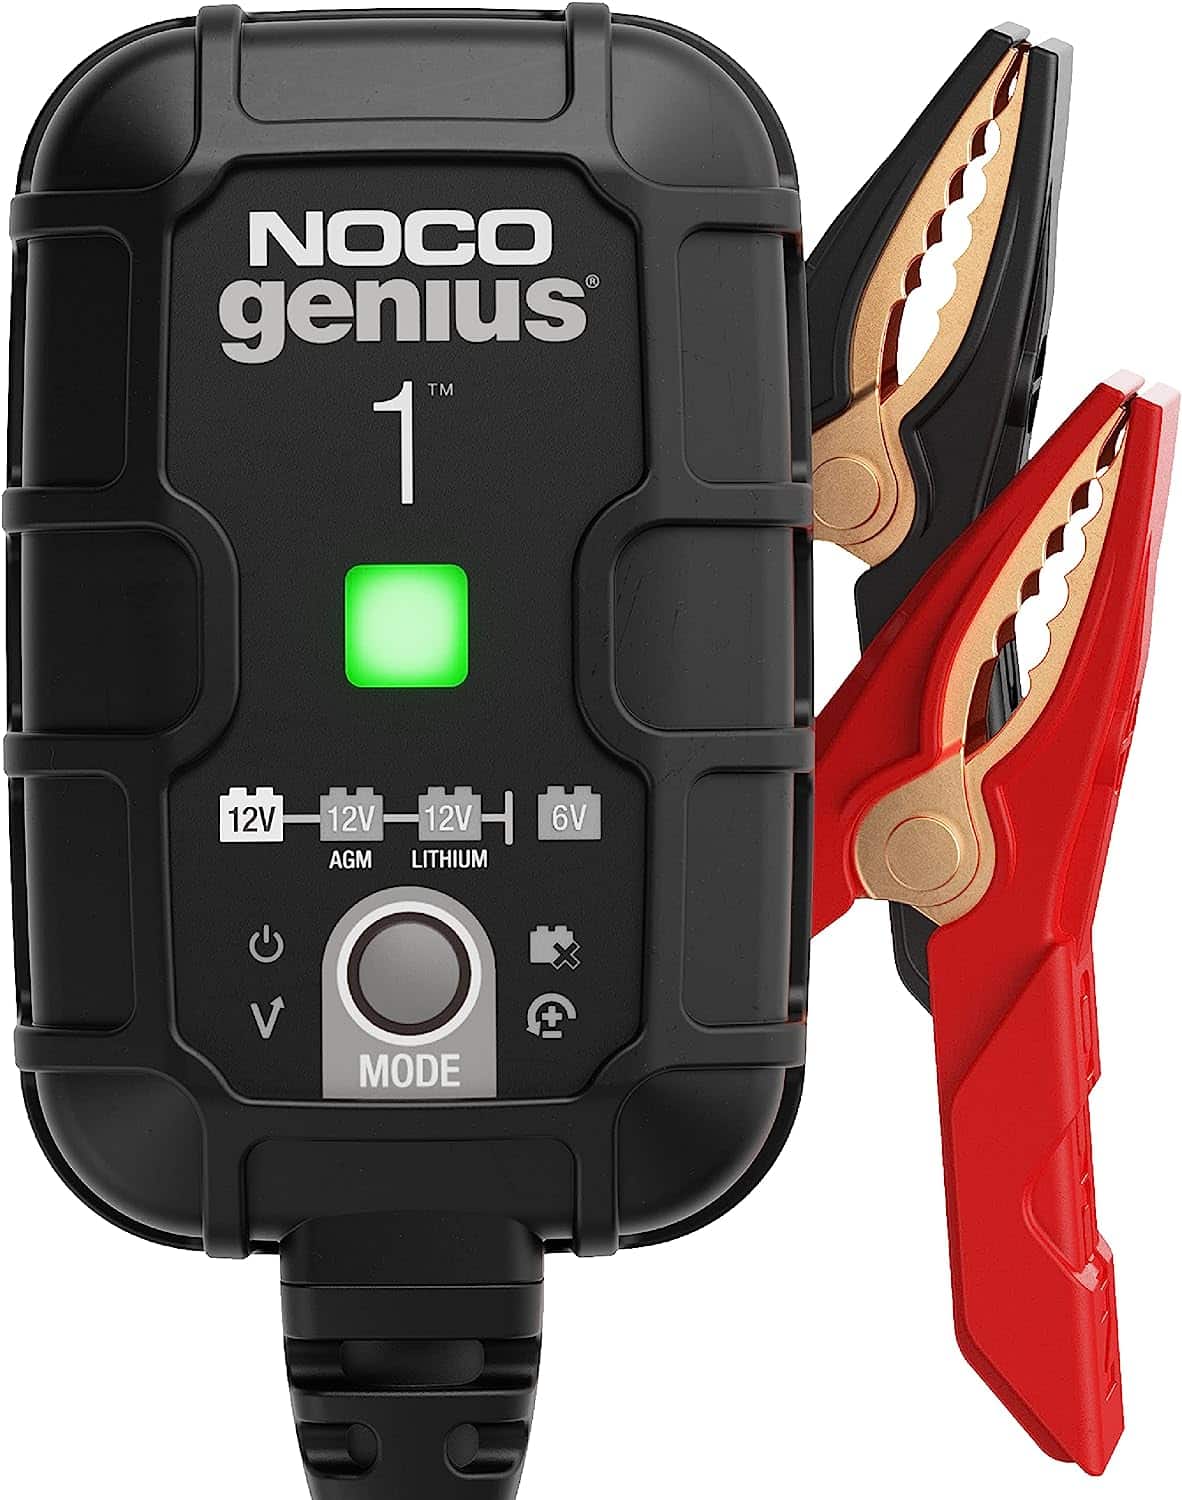 NOCO GENIUS1UK, 1A Car Battery Charger, 6V and 12V Portable Smart Charger 0205